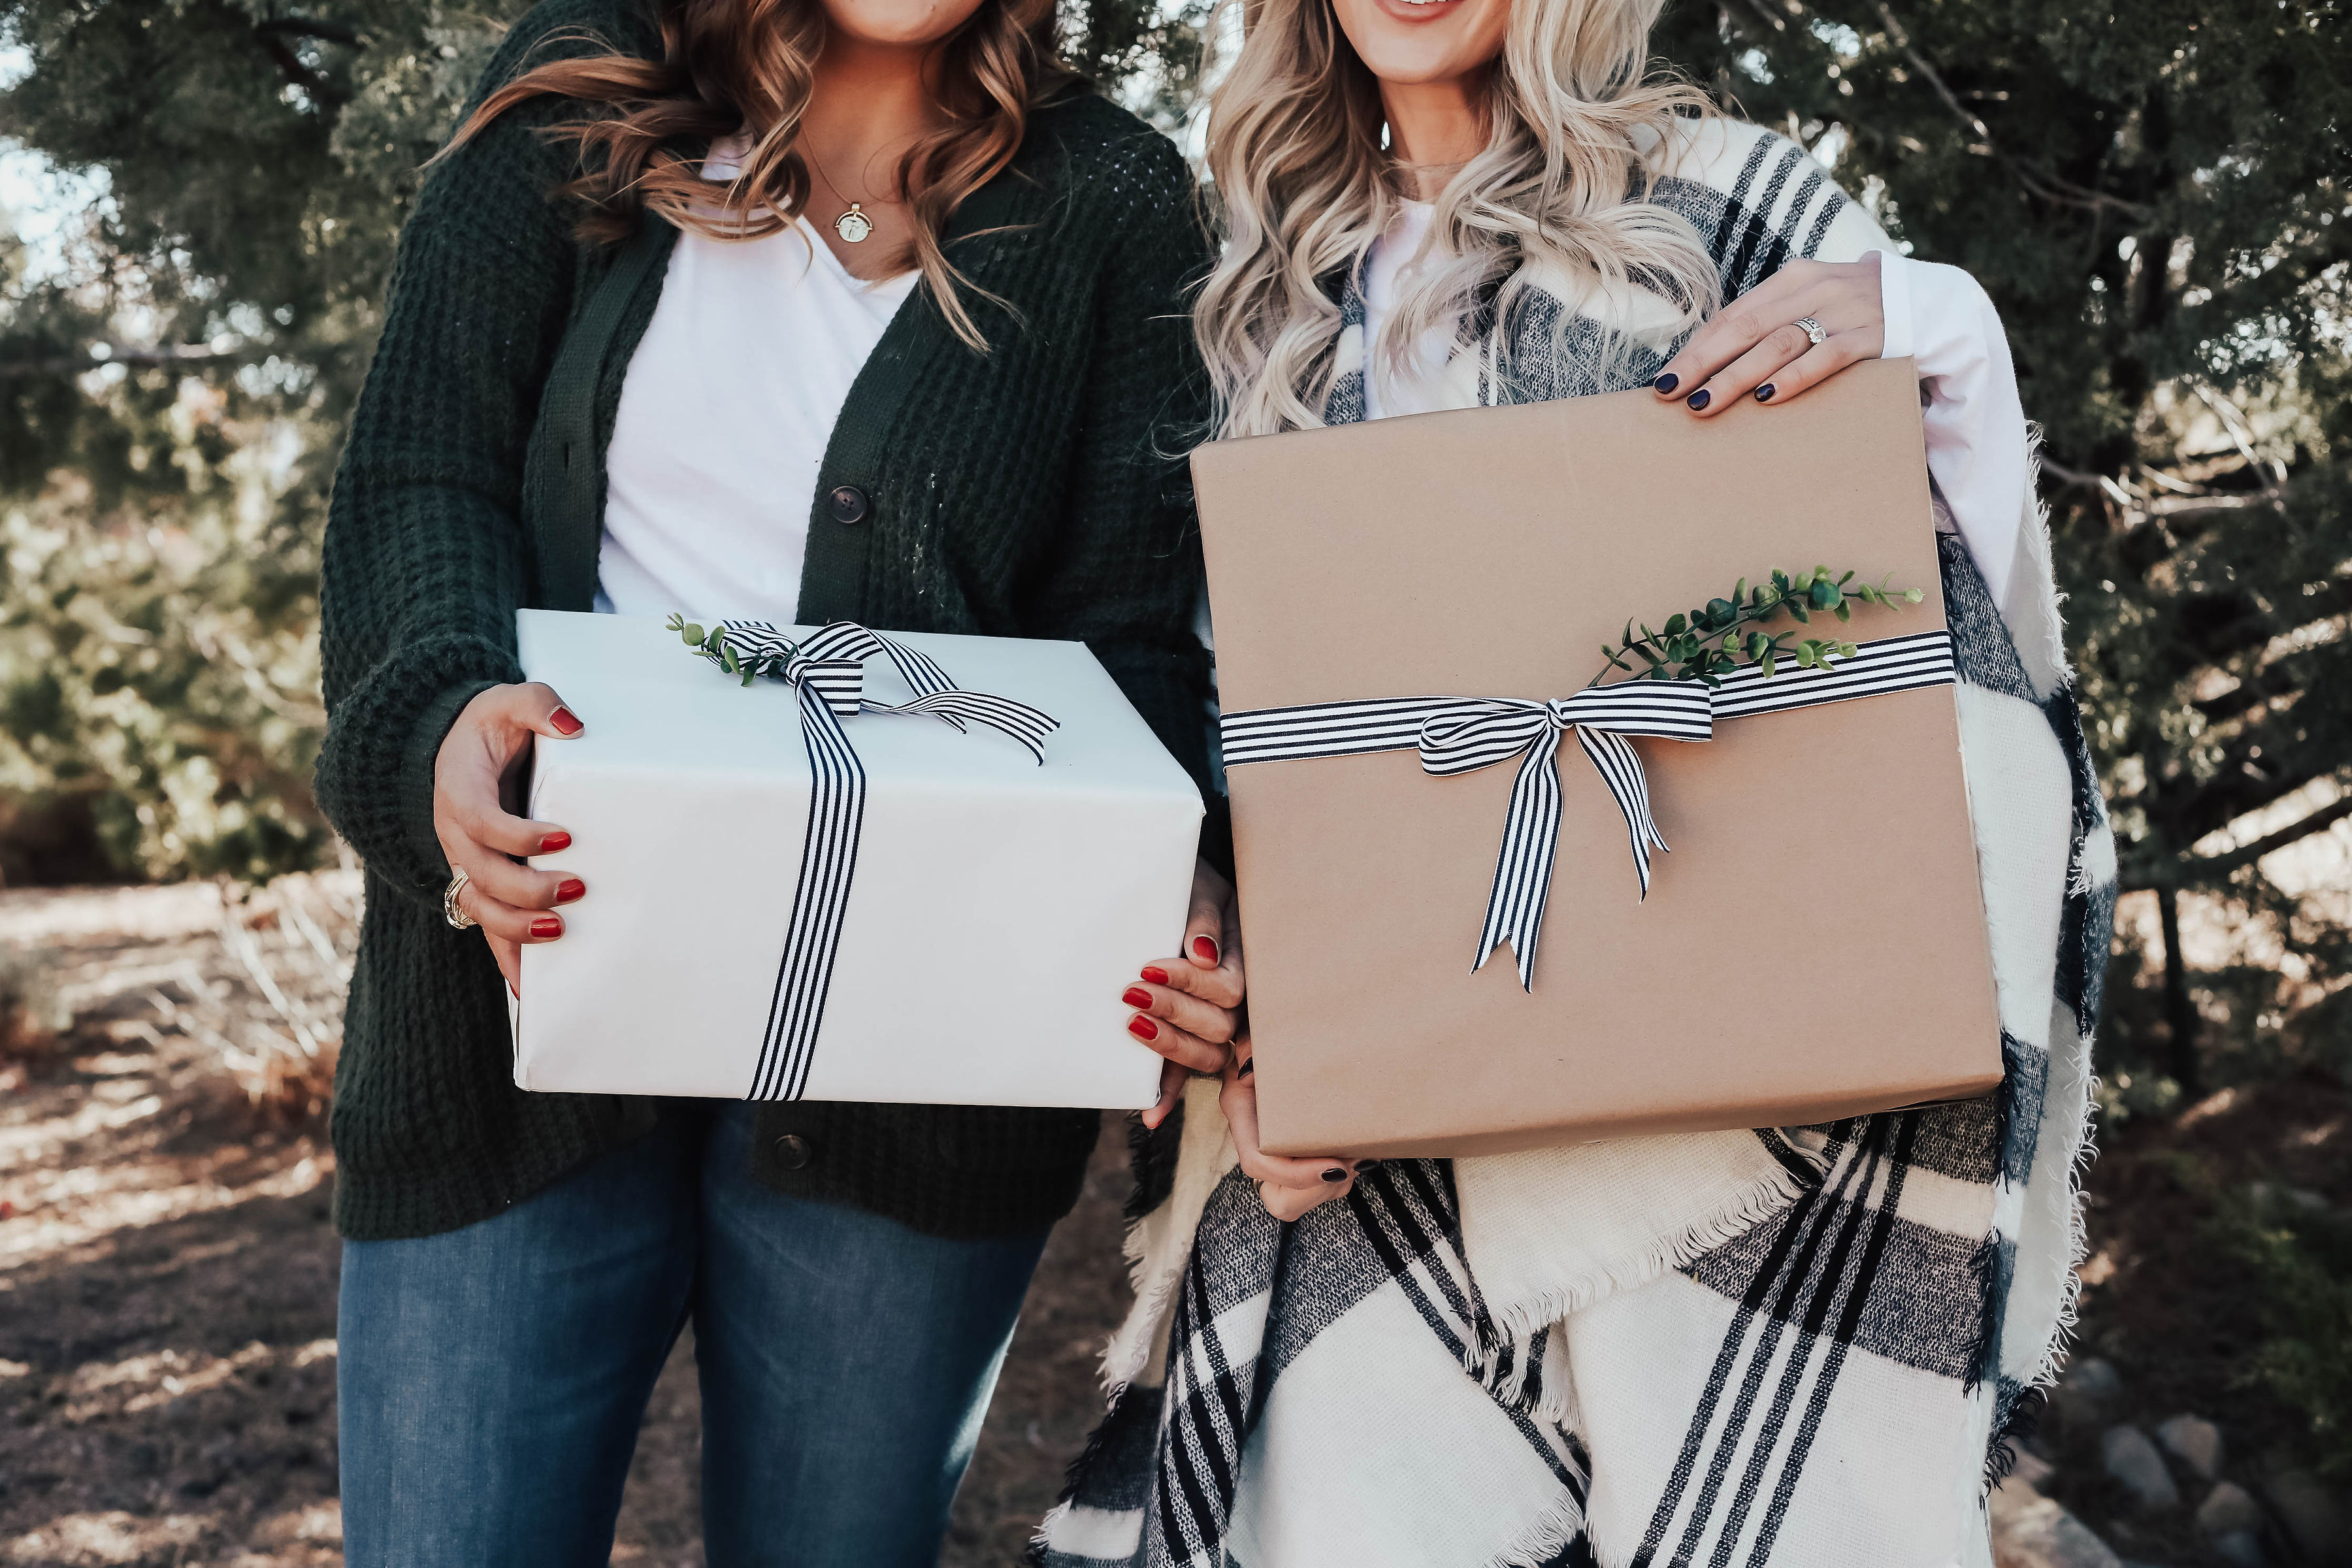 Ashley Zeal and Emily Wieczorek of The Ash and Em blog share all their favorite simple holiday decor - neutral wreaths, garland, and trees!